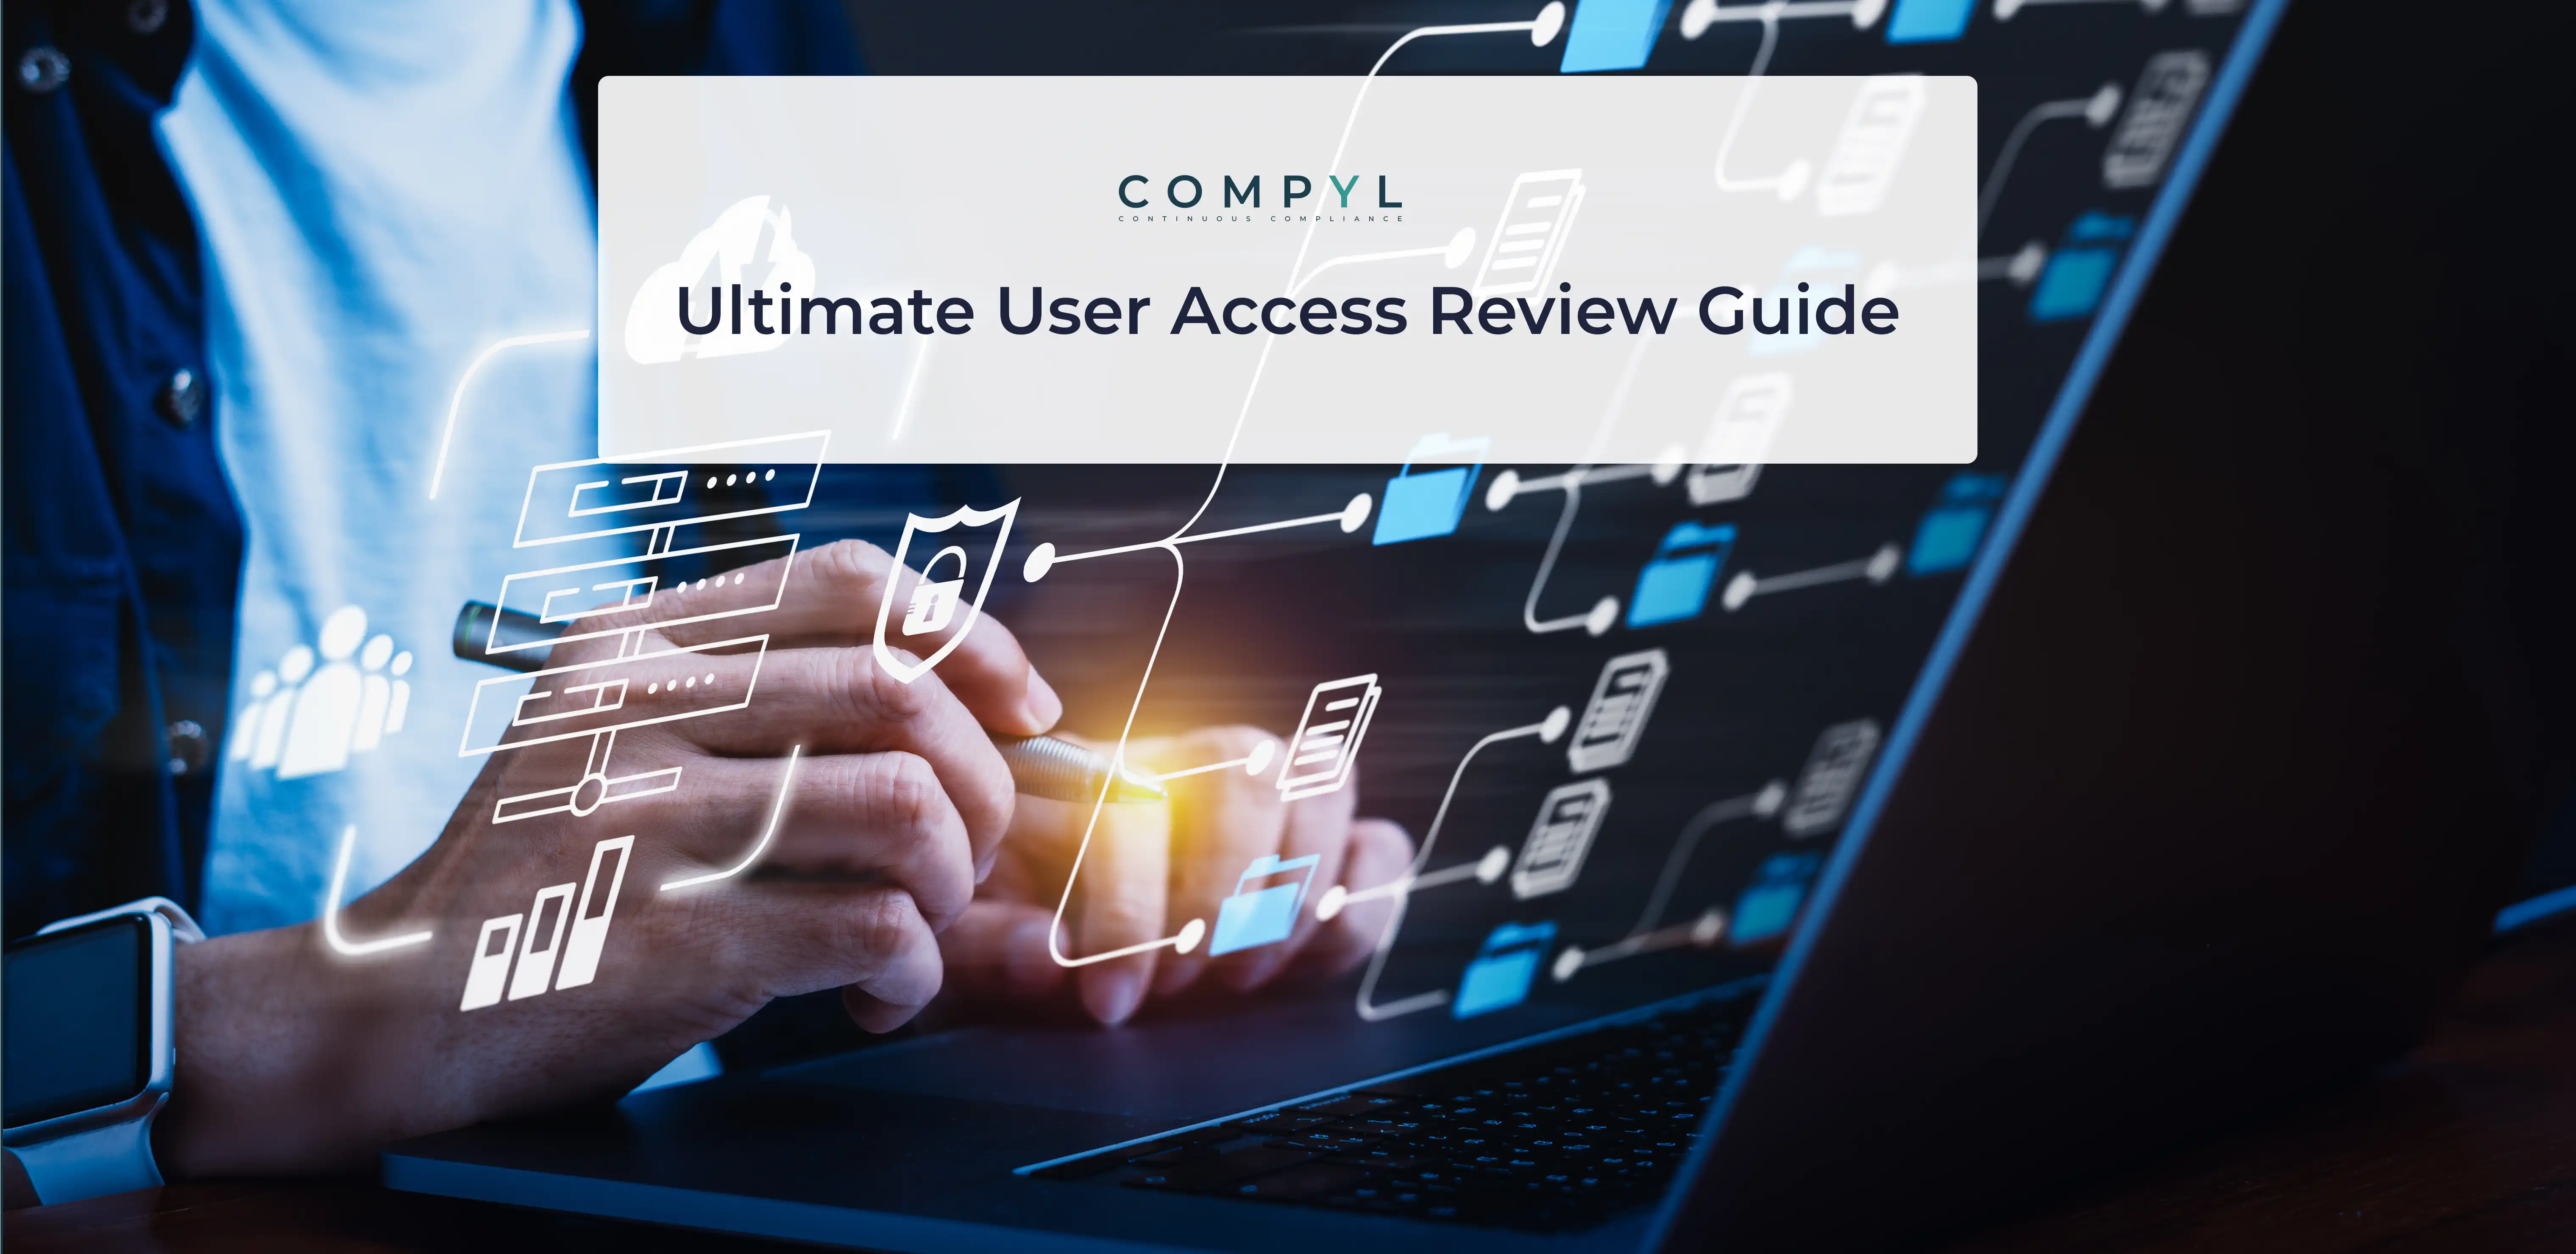 Compyl Ultimate User Access Review Guide